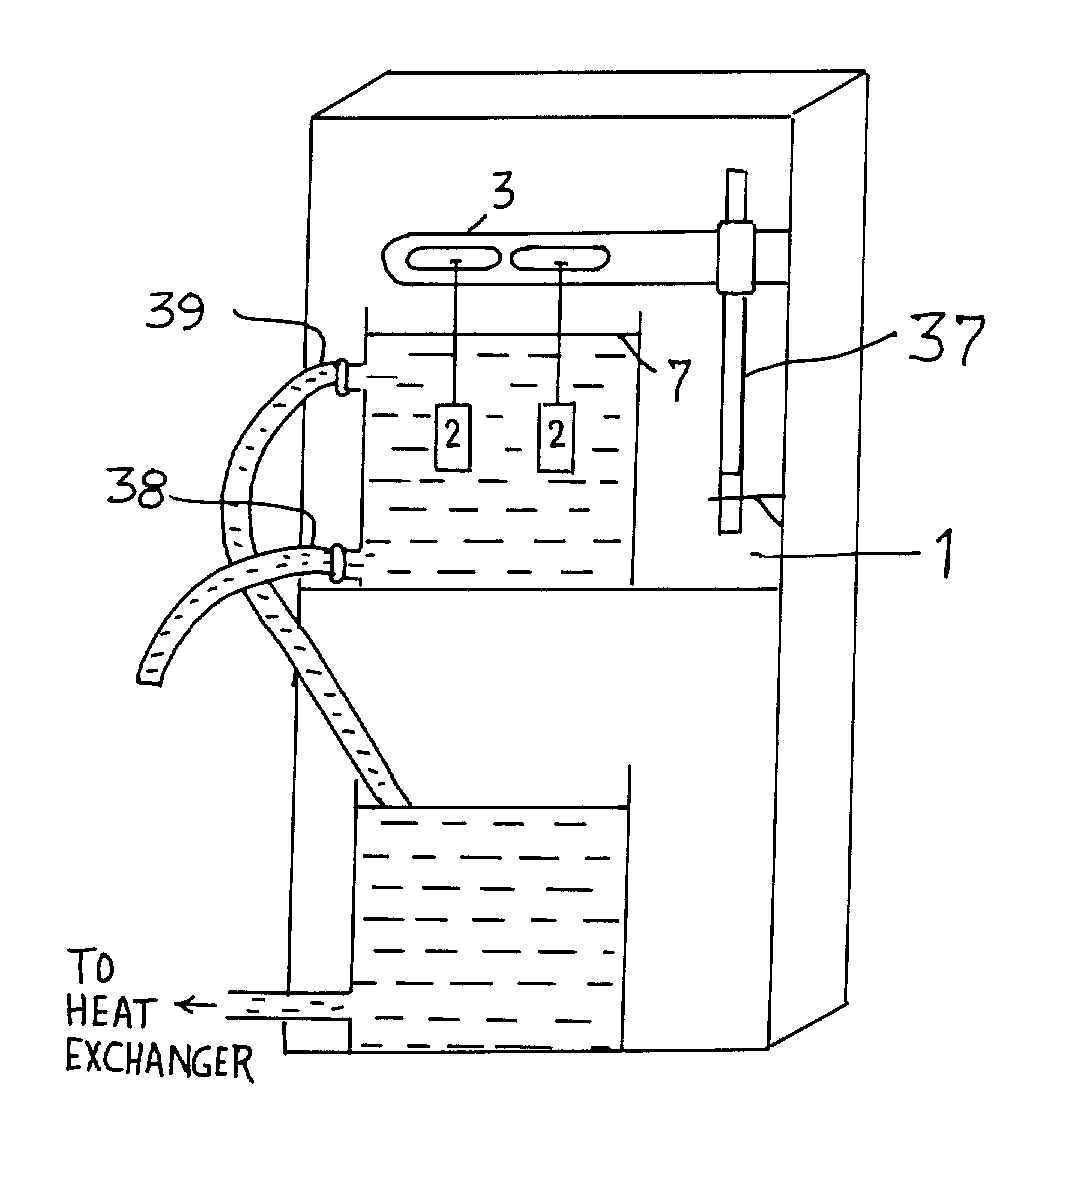 Process for forming coatings on metallic bodies and an apparatus for carrying out the process